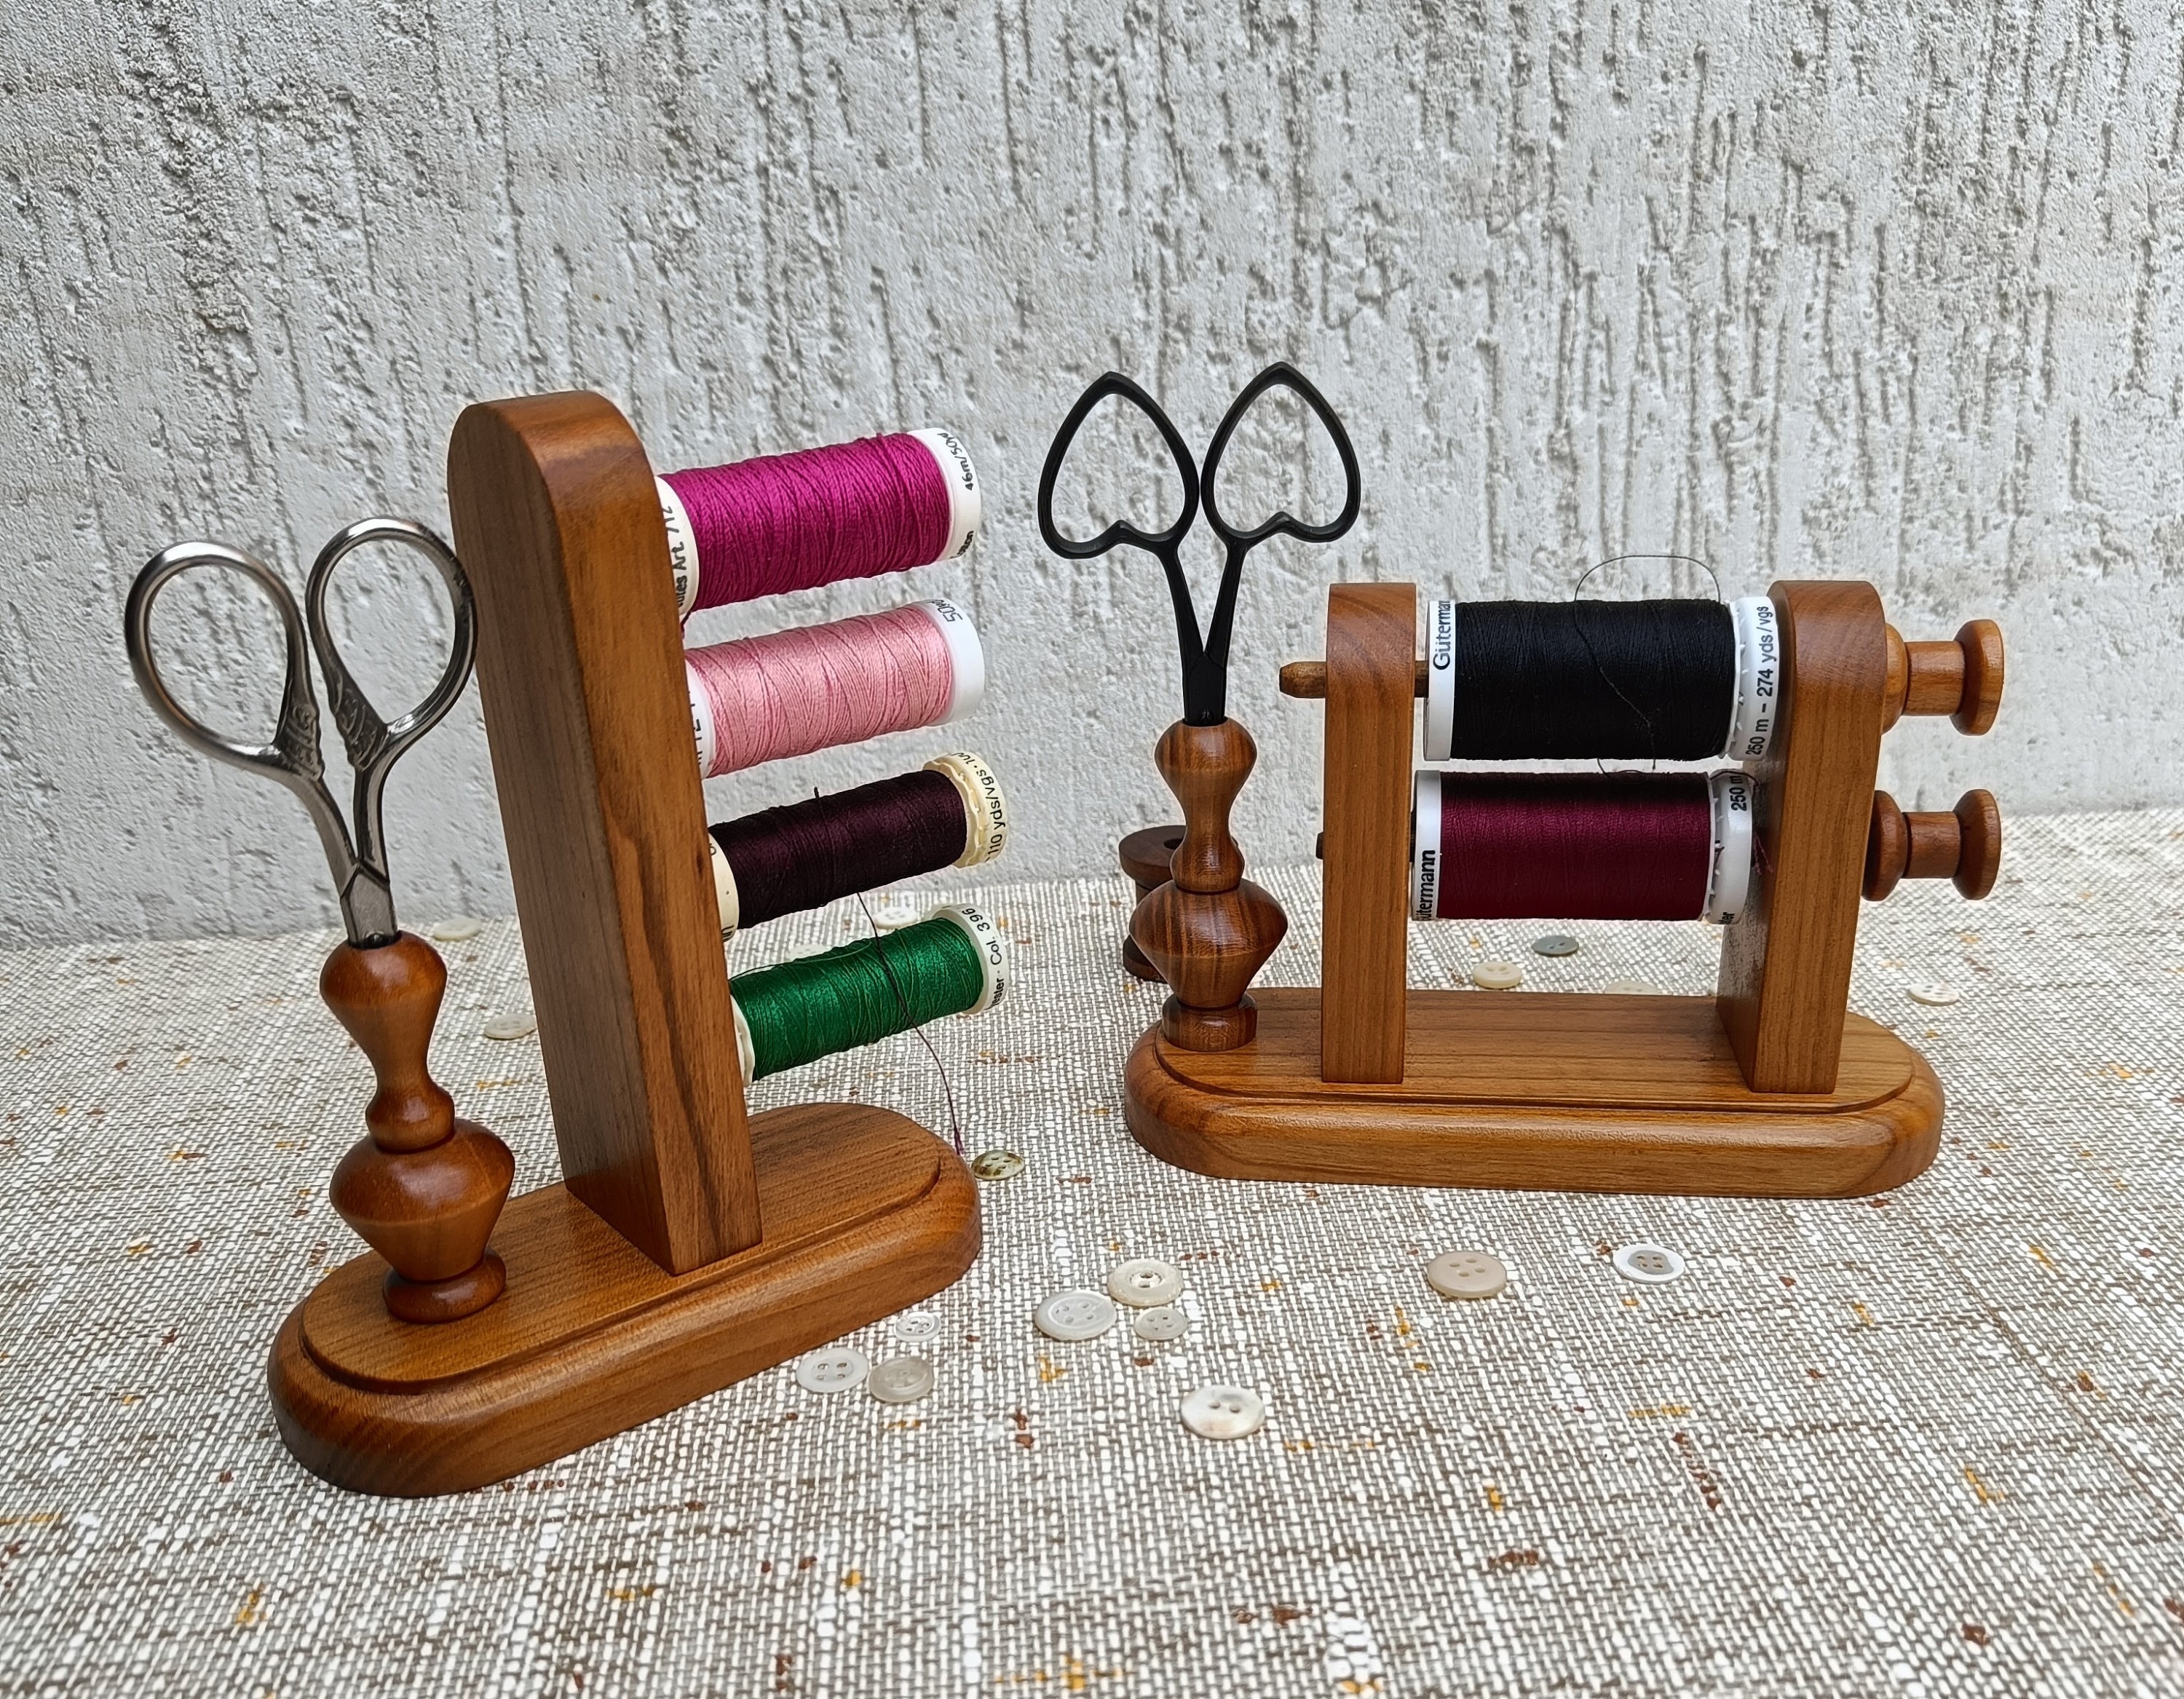 Thread Holder, Ceramic, Embroidery Thread Holder, Botanical, One of a Kind,  Haberdashery, Unique Gifts 